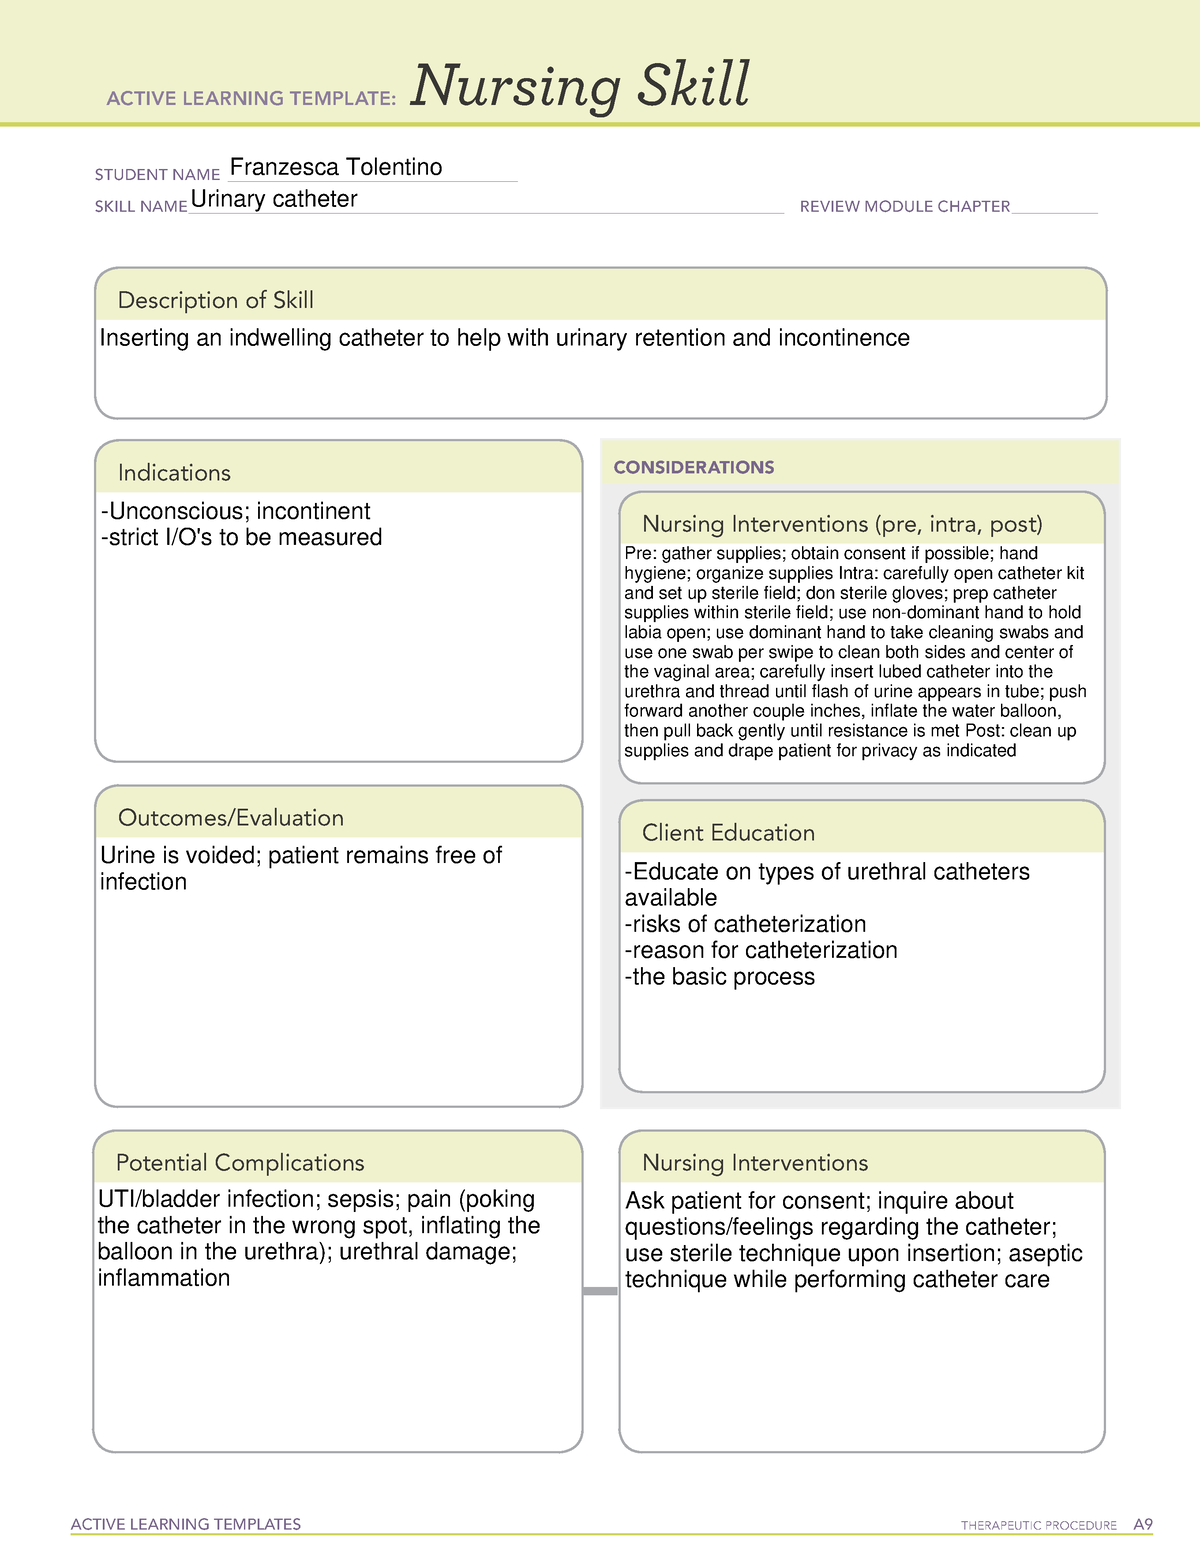 Active Learning Template Nursing Skill